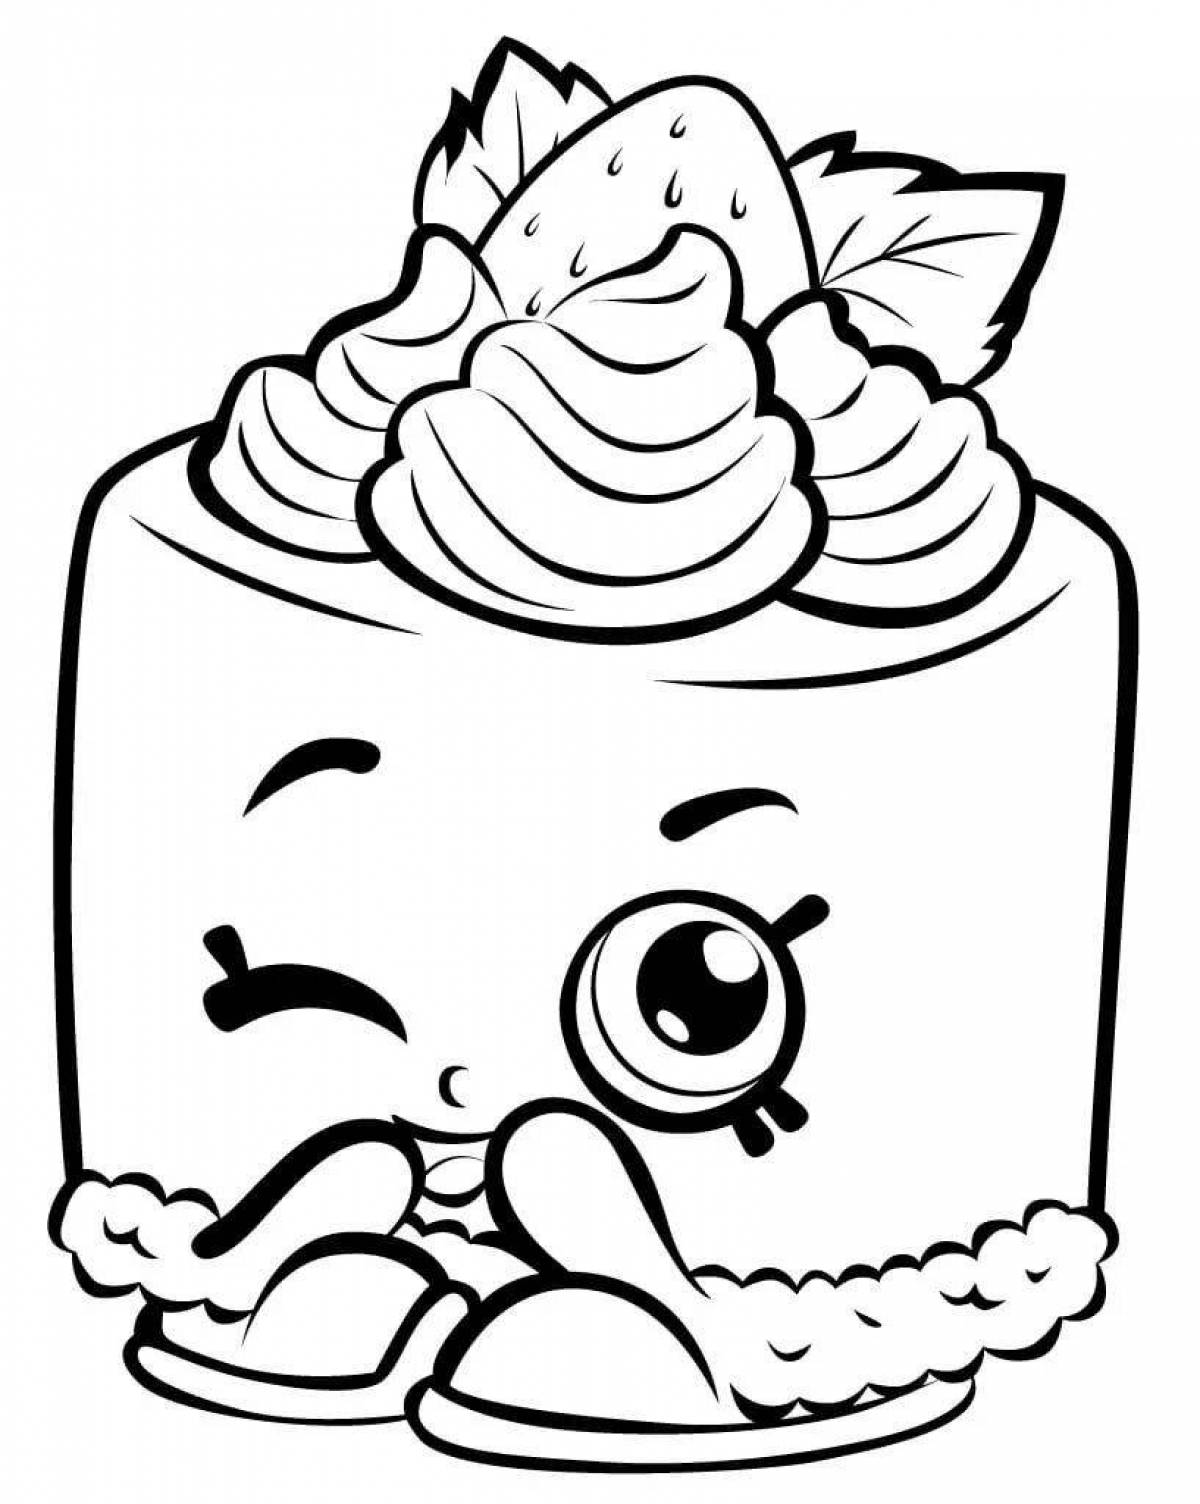 Adorable lol food coloring page